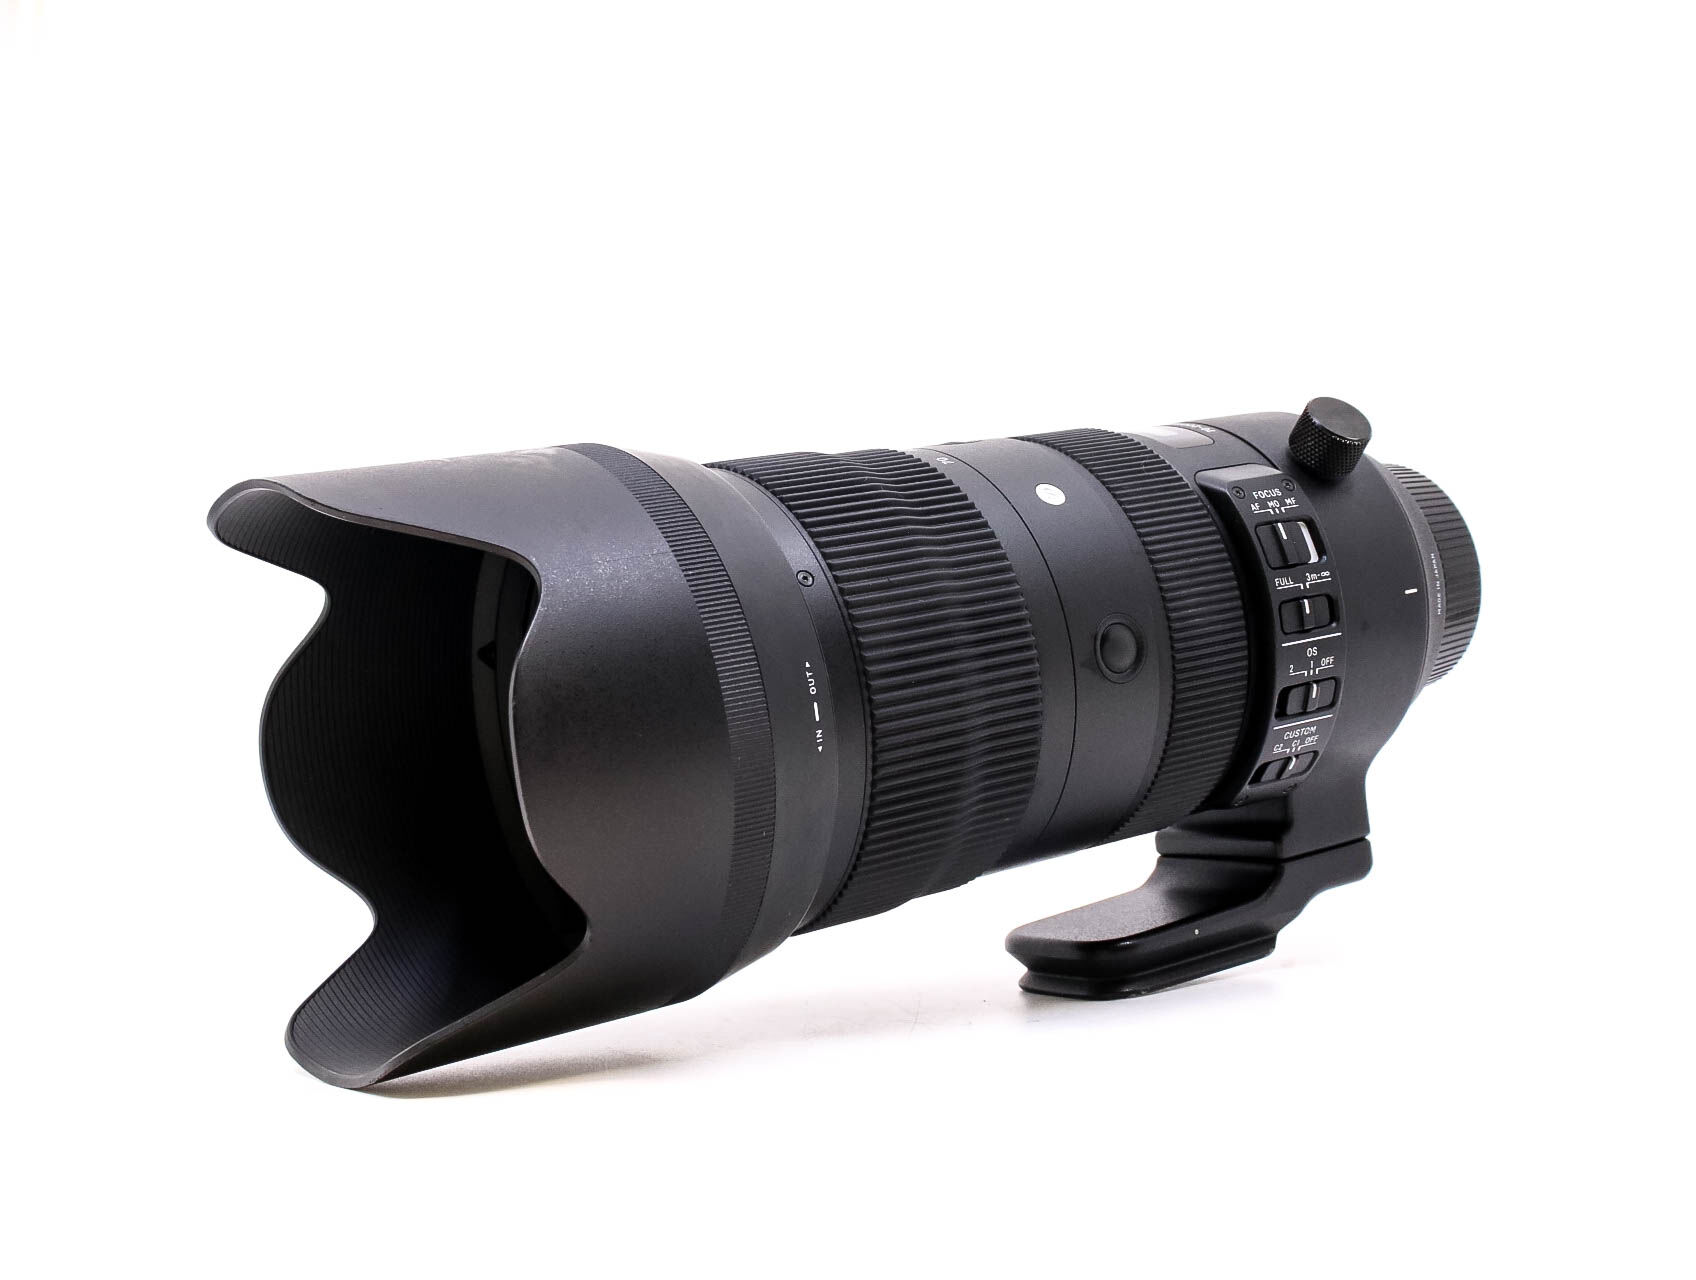 sigma 70-200mm f/2.8 dg os hsm sport nikon fit (condition: well used)